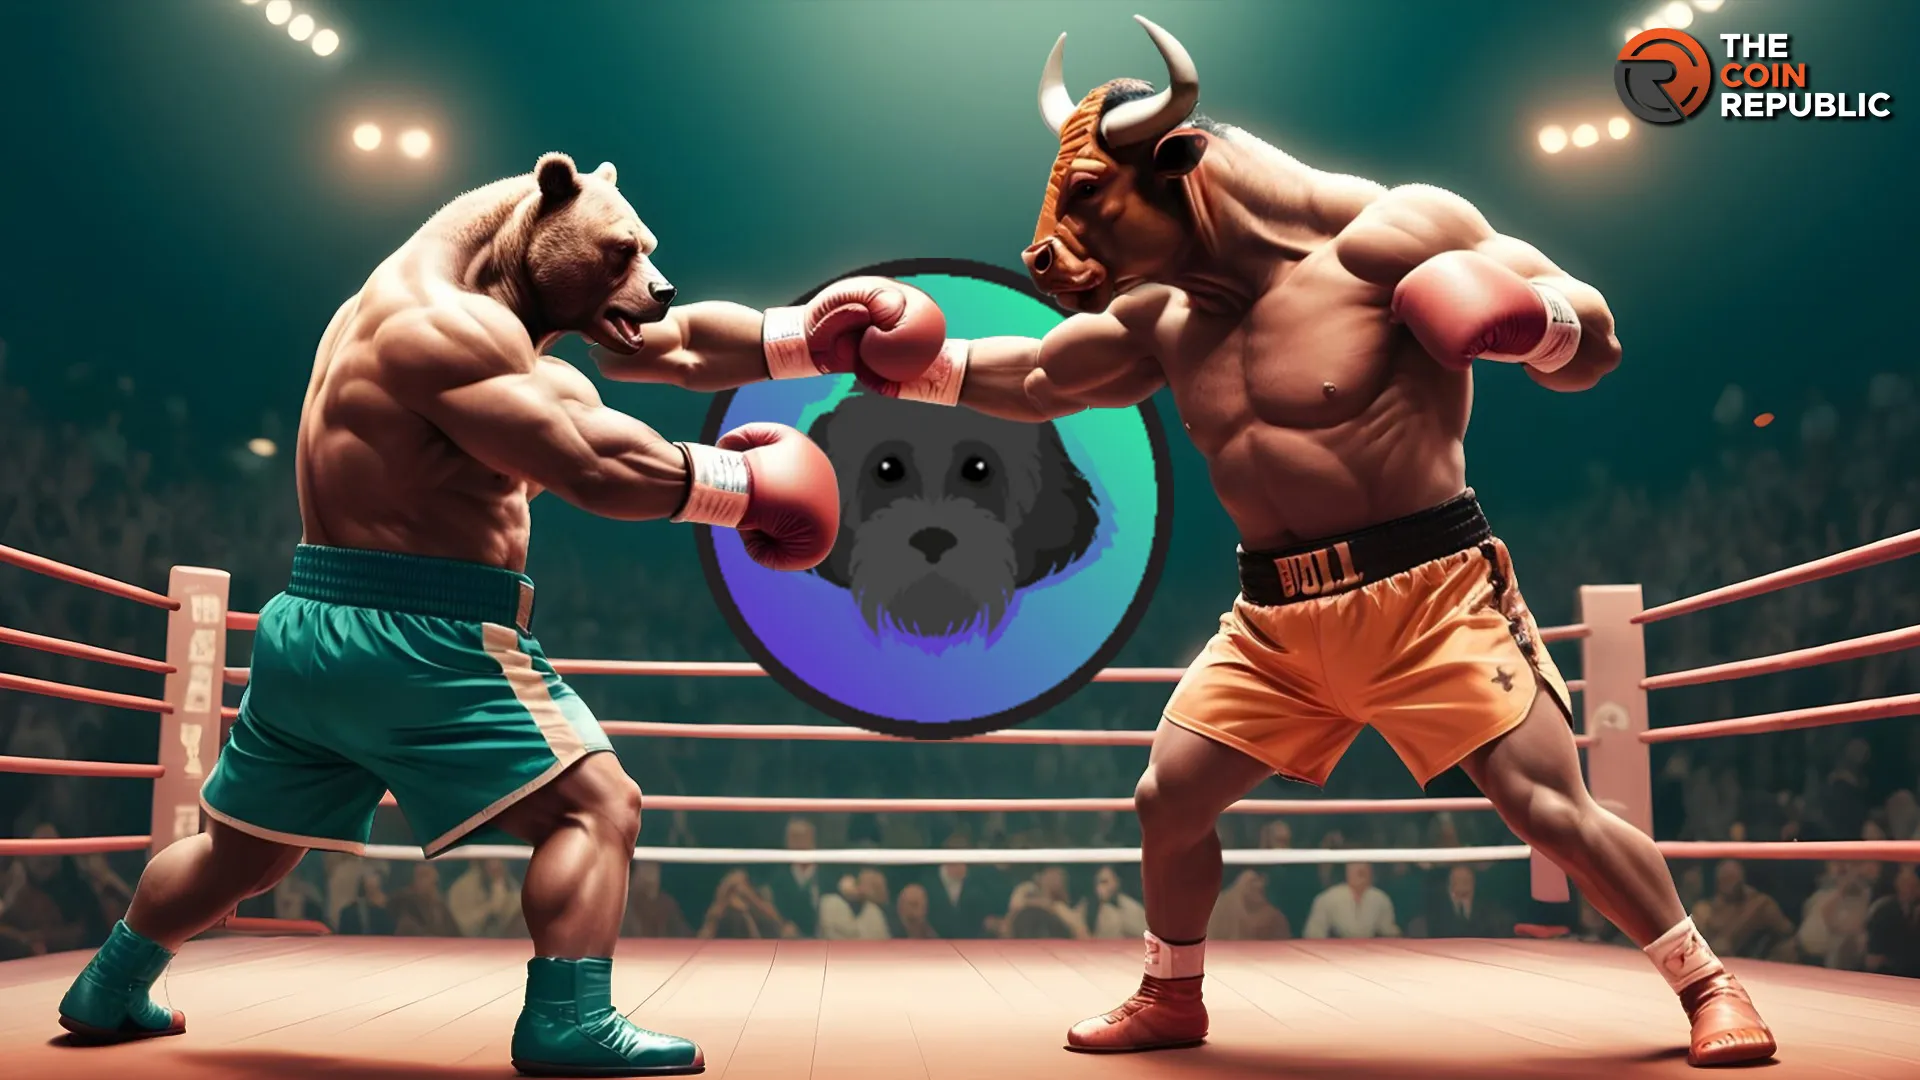 In The Battle Among Bulls & Bears For MYRO Coin, Who Will Prevail?